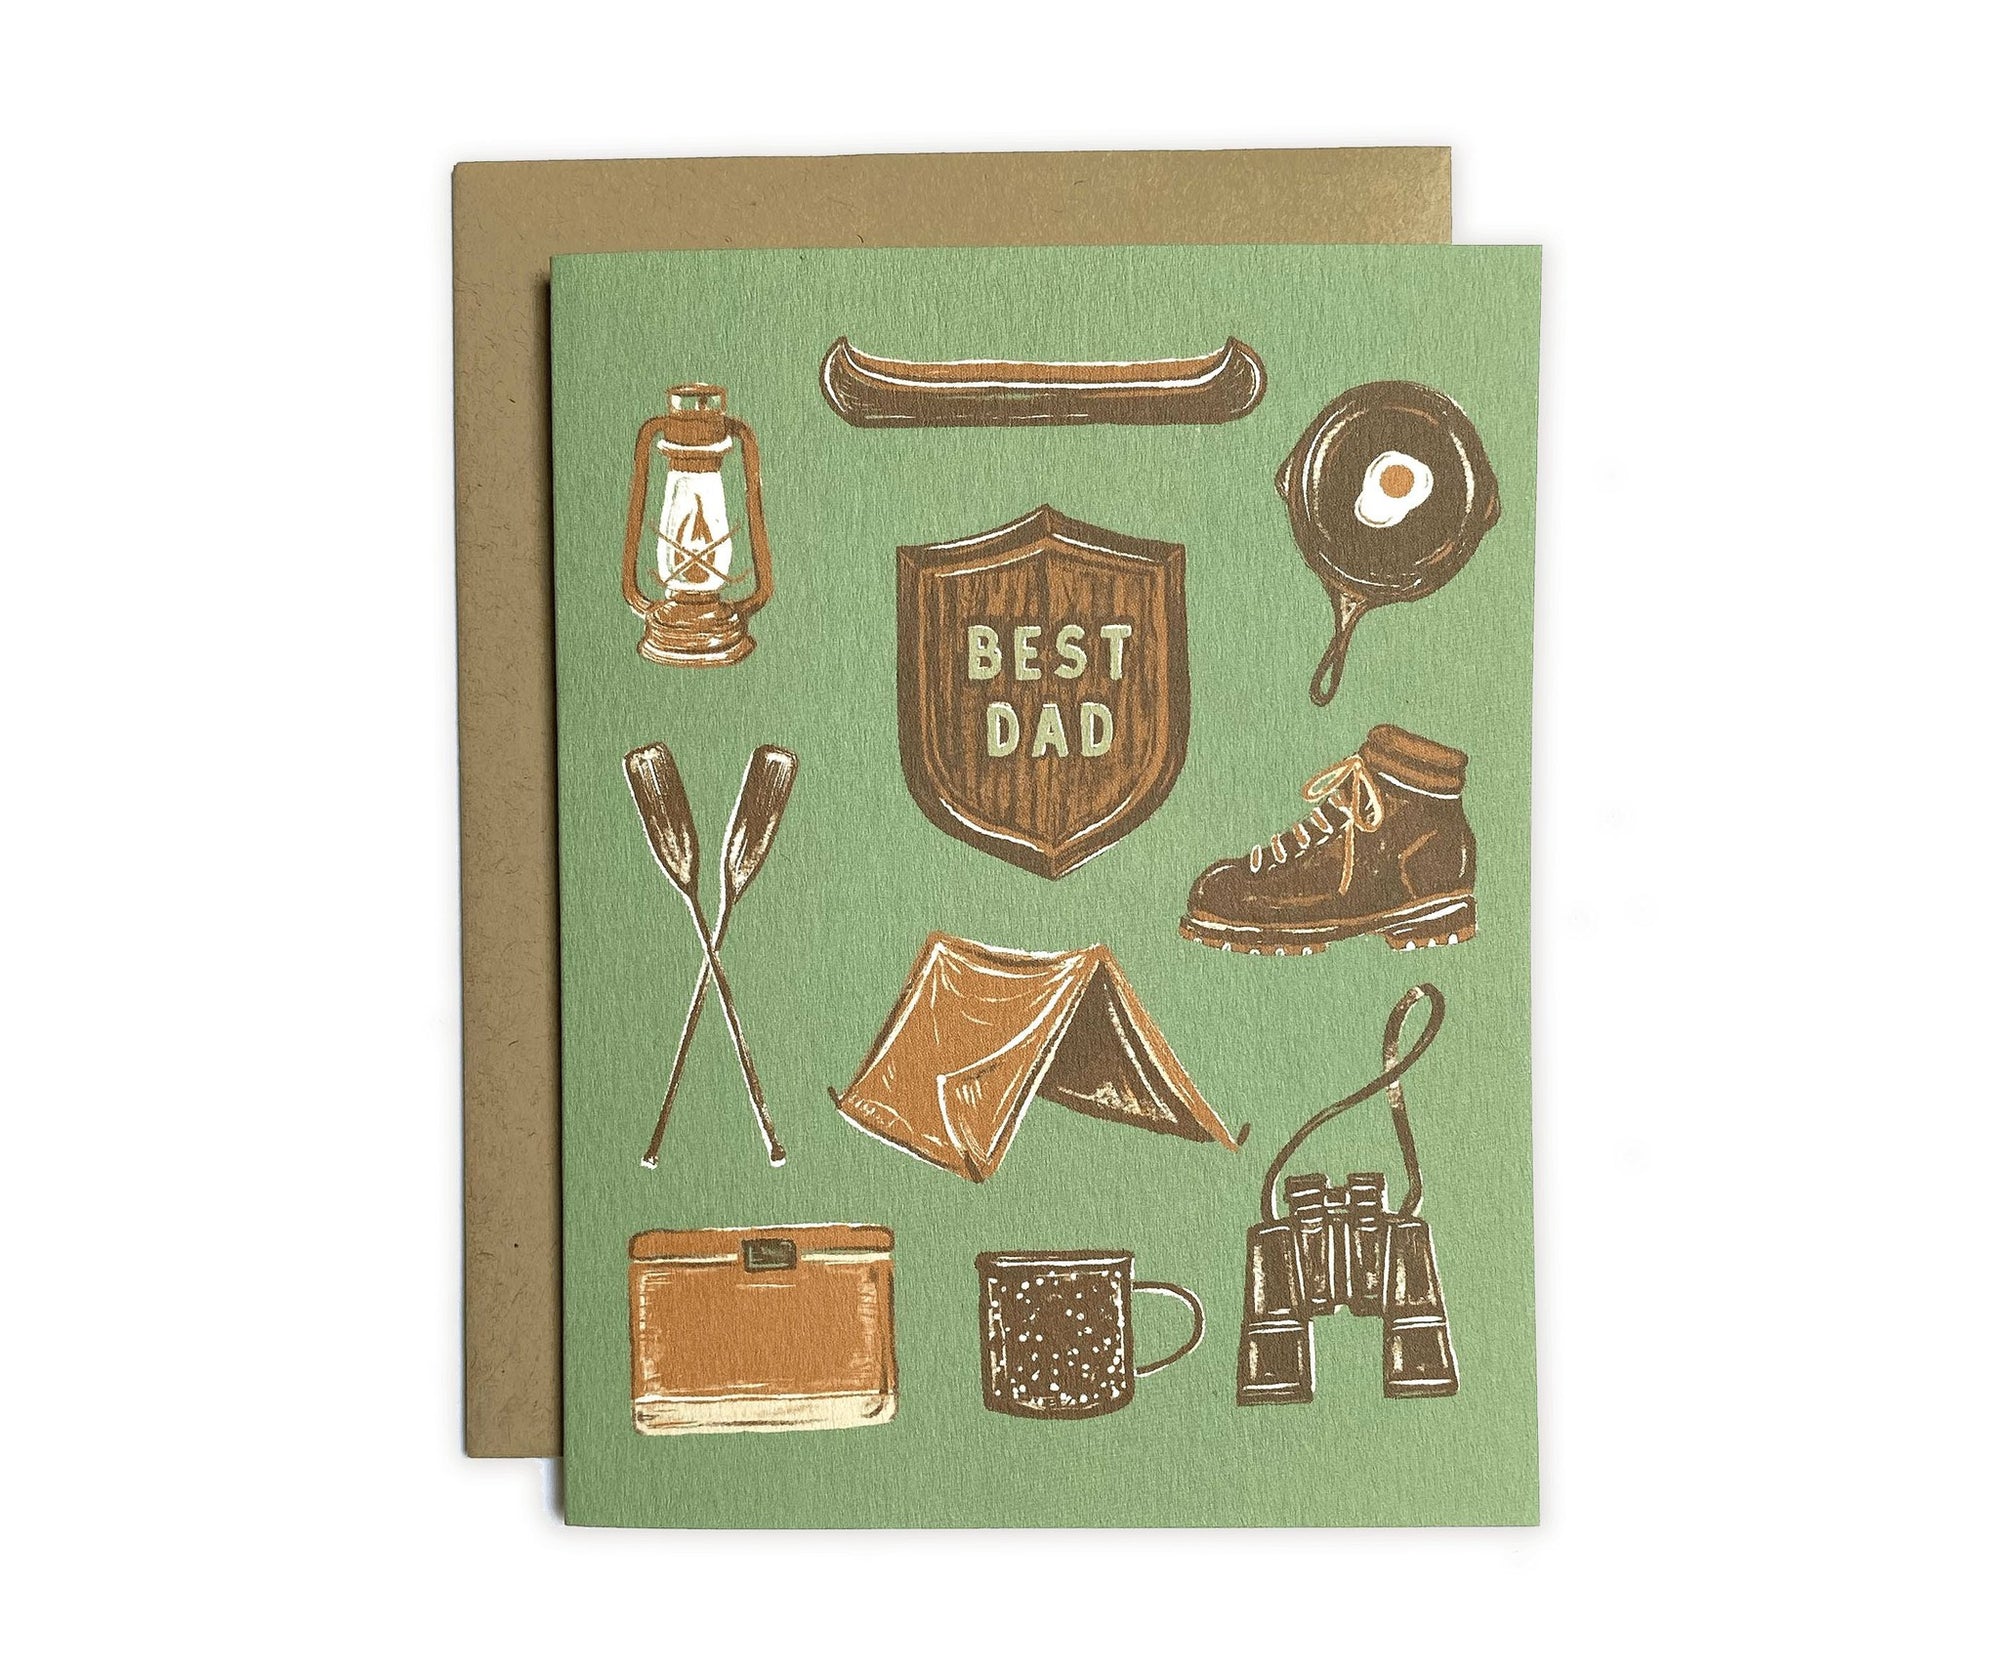 The Wild Wander's Best Dad Camp Greeting Card.